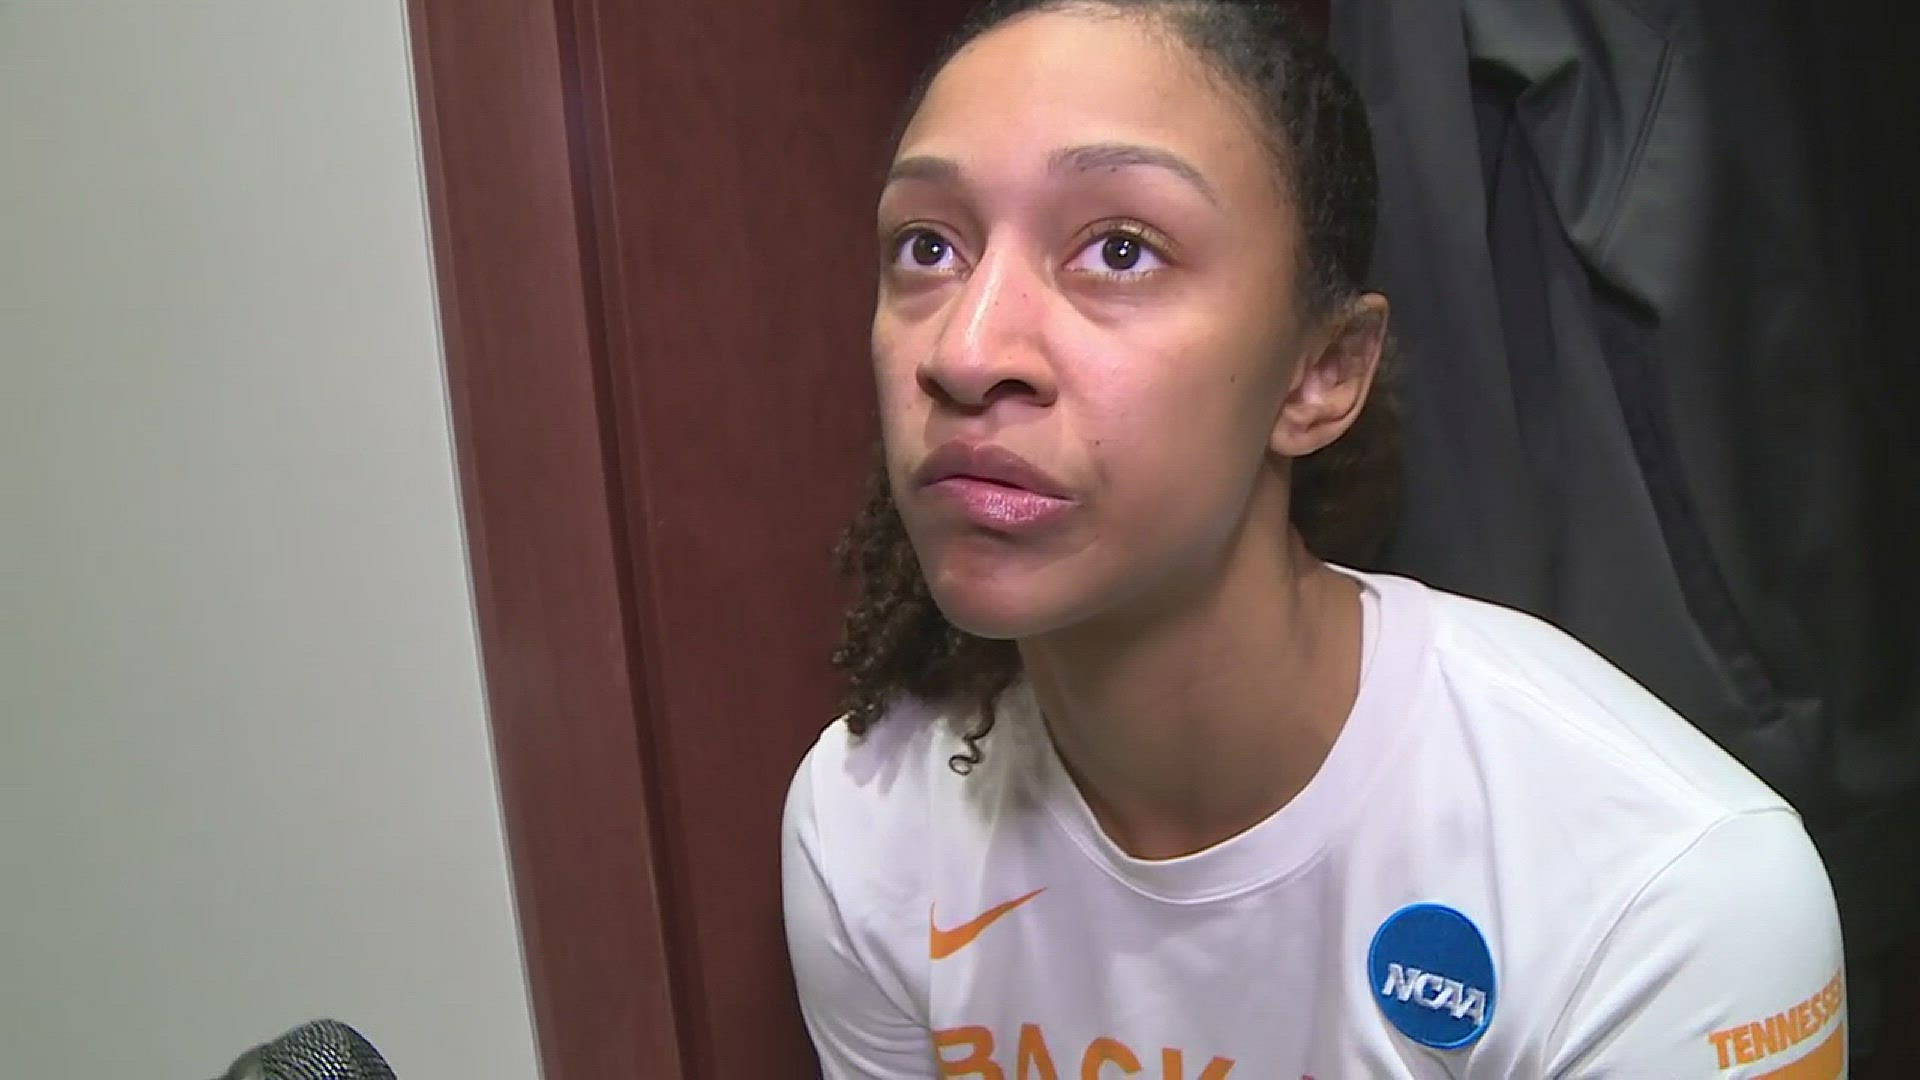 Lady Vols senior Jaime Nared reflects on her final game as a Lady Vol.